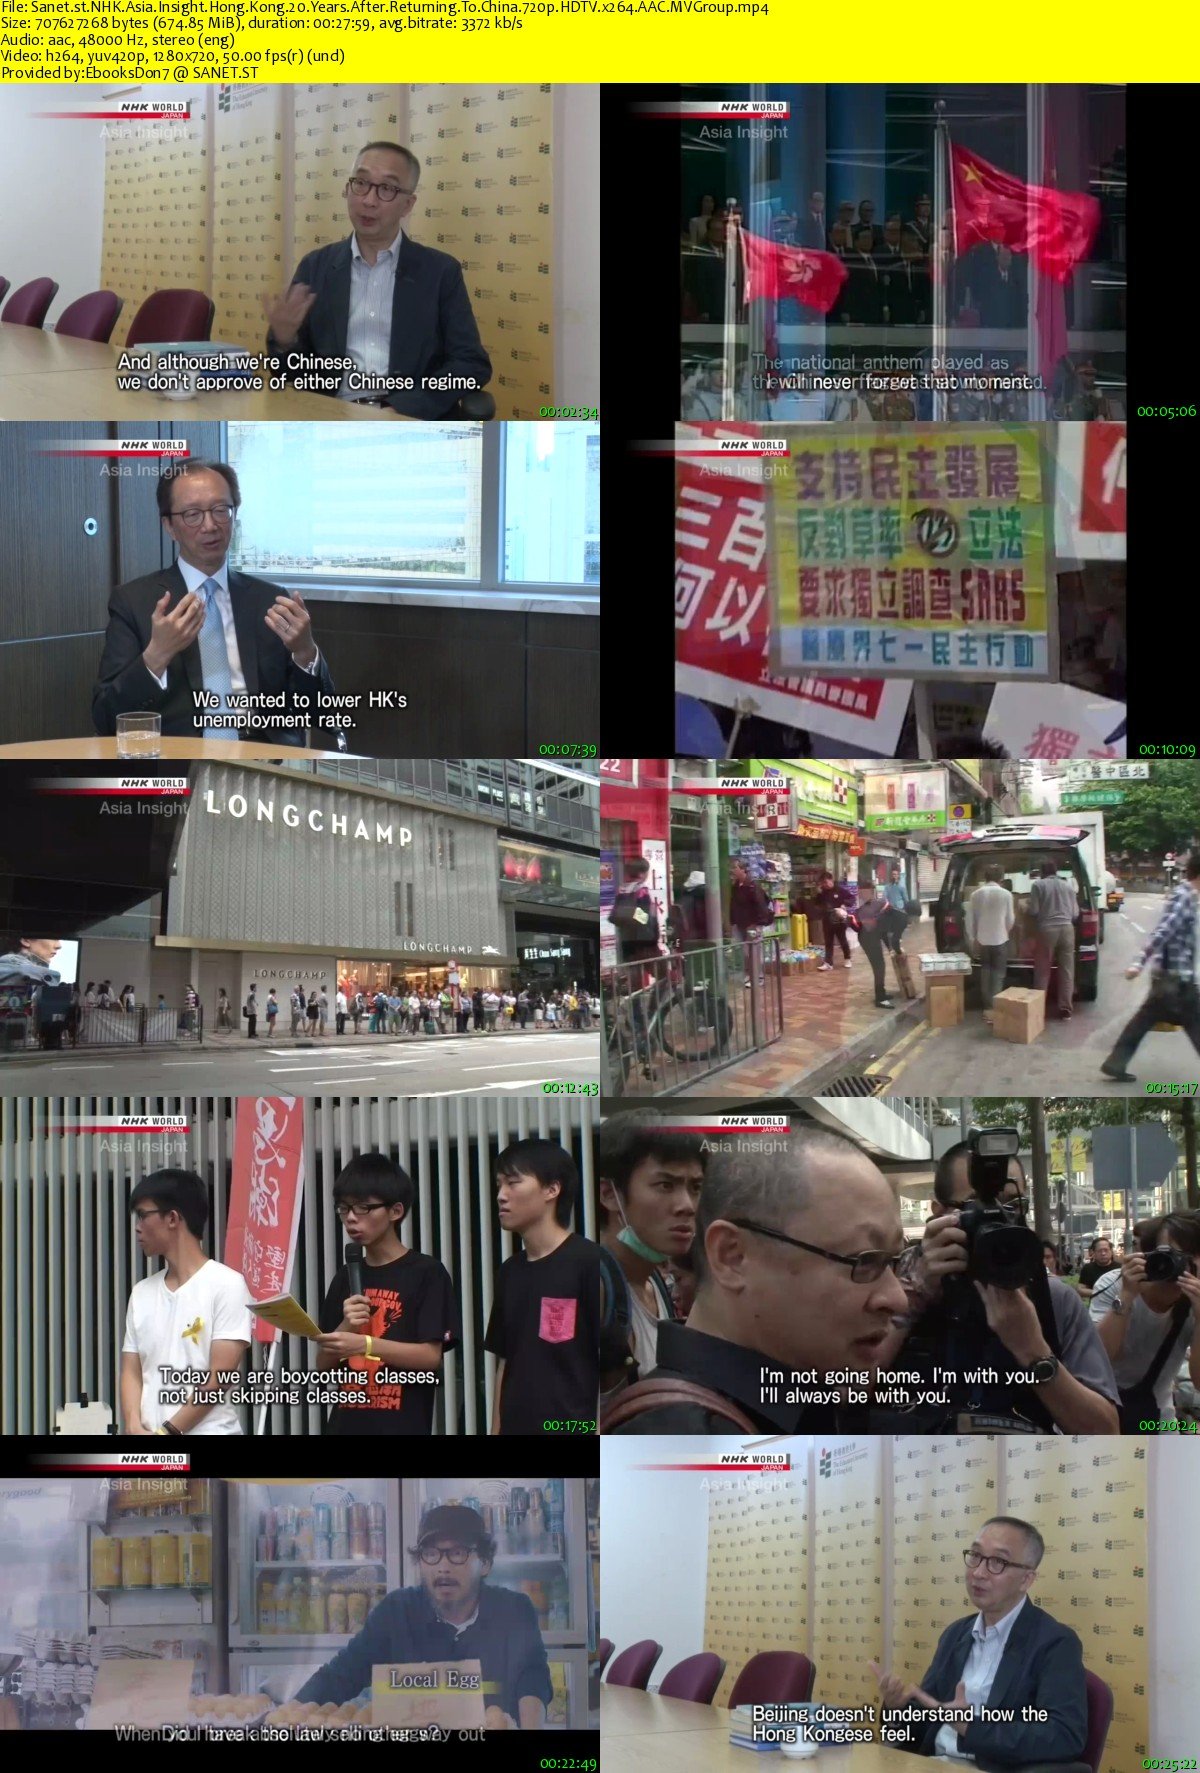 Nhk Asia Insight Hong Kong 20 Years After Returning To China 2018 720p Hdtv X264 Aac 3222